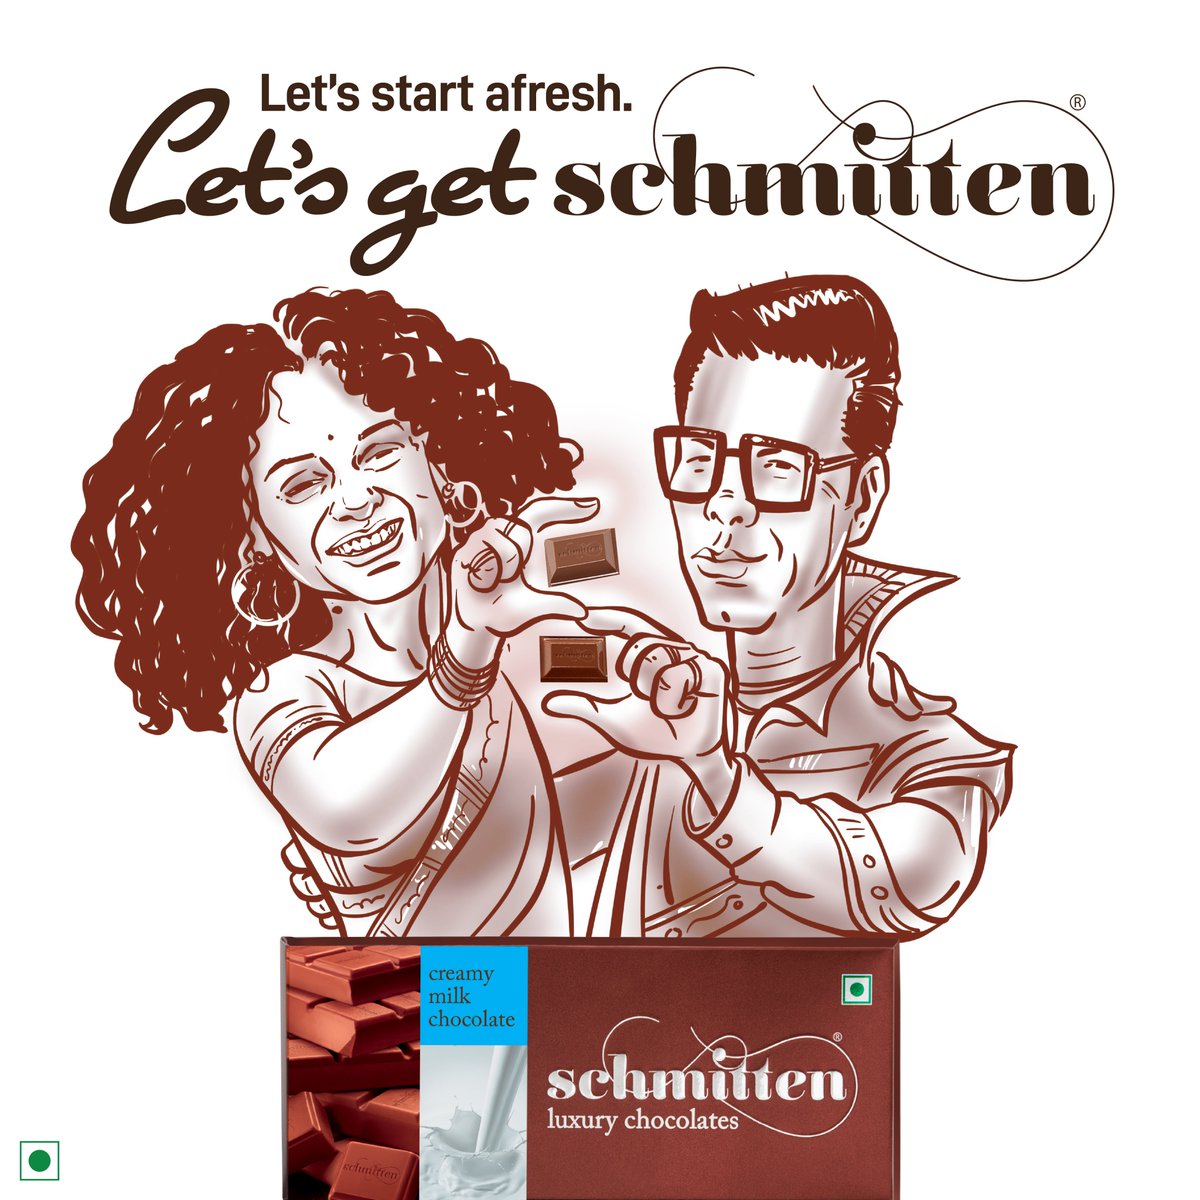 In a world where feuds and controversies often dominate, Schmitten is entwining hearts with its rich flavors and transcends discord,🍫❤️Lets get Schmitten and work together to make the world a little sweeter. 
#Schmitten #LovePrevails #SchmittenChocolates #LuxuryChocolates